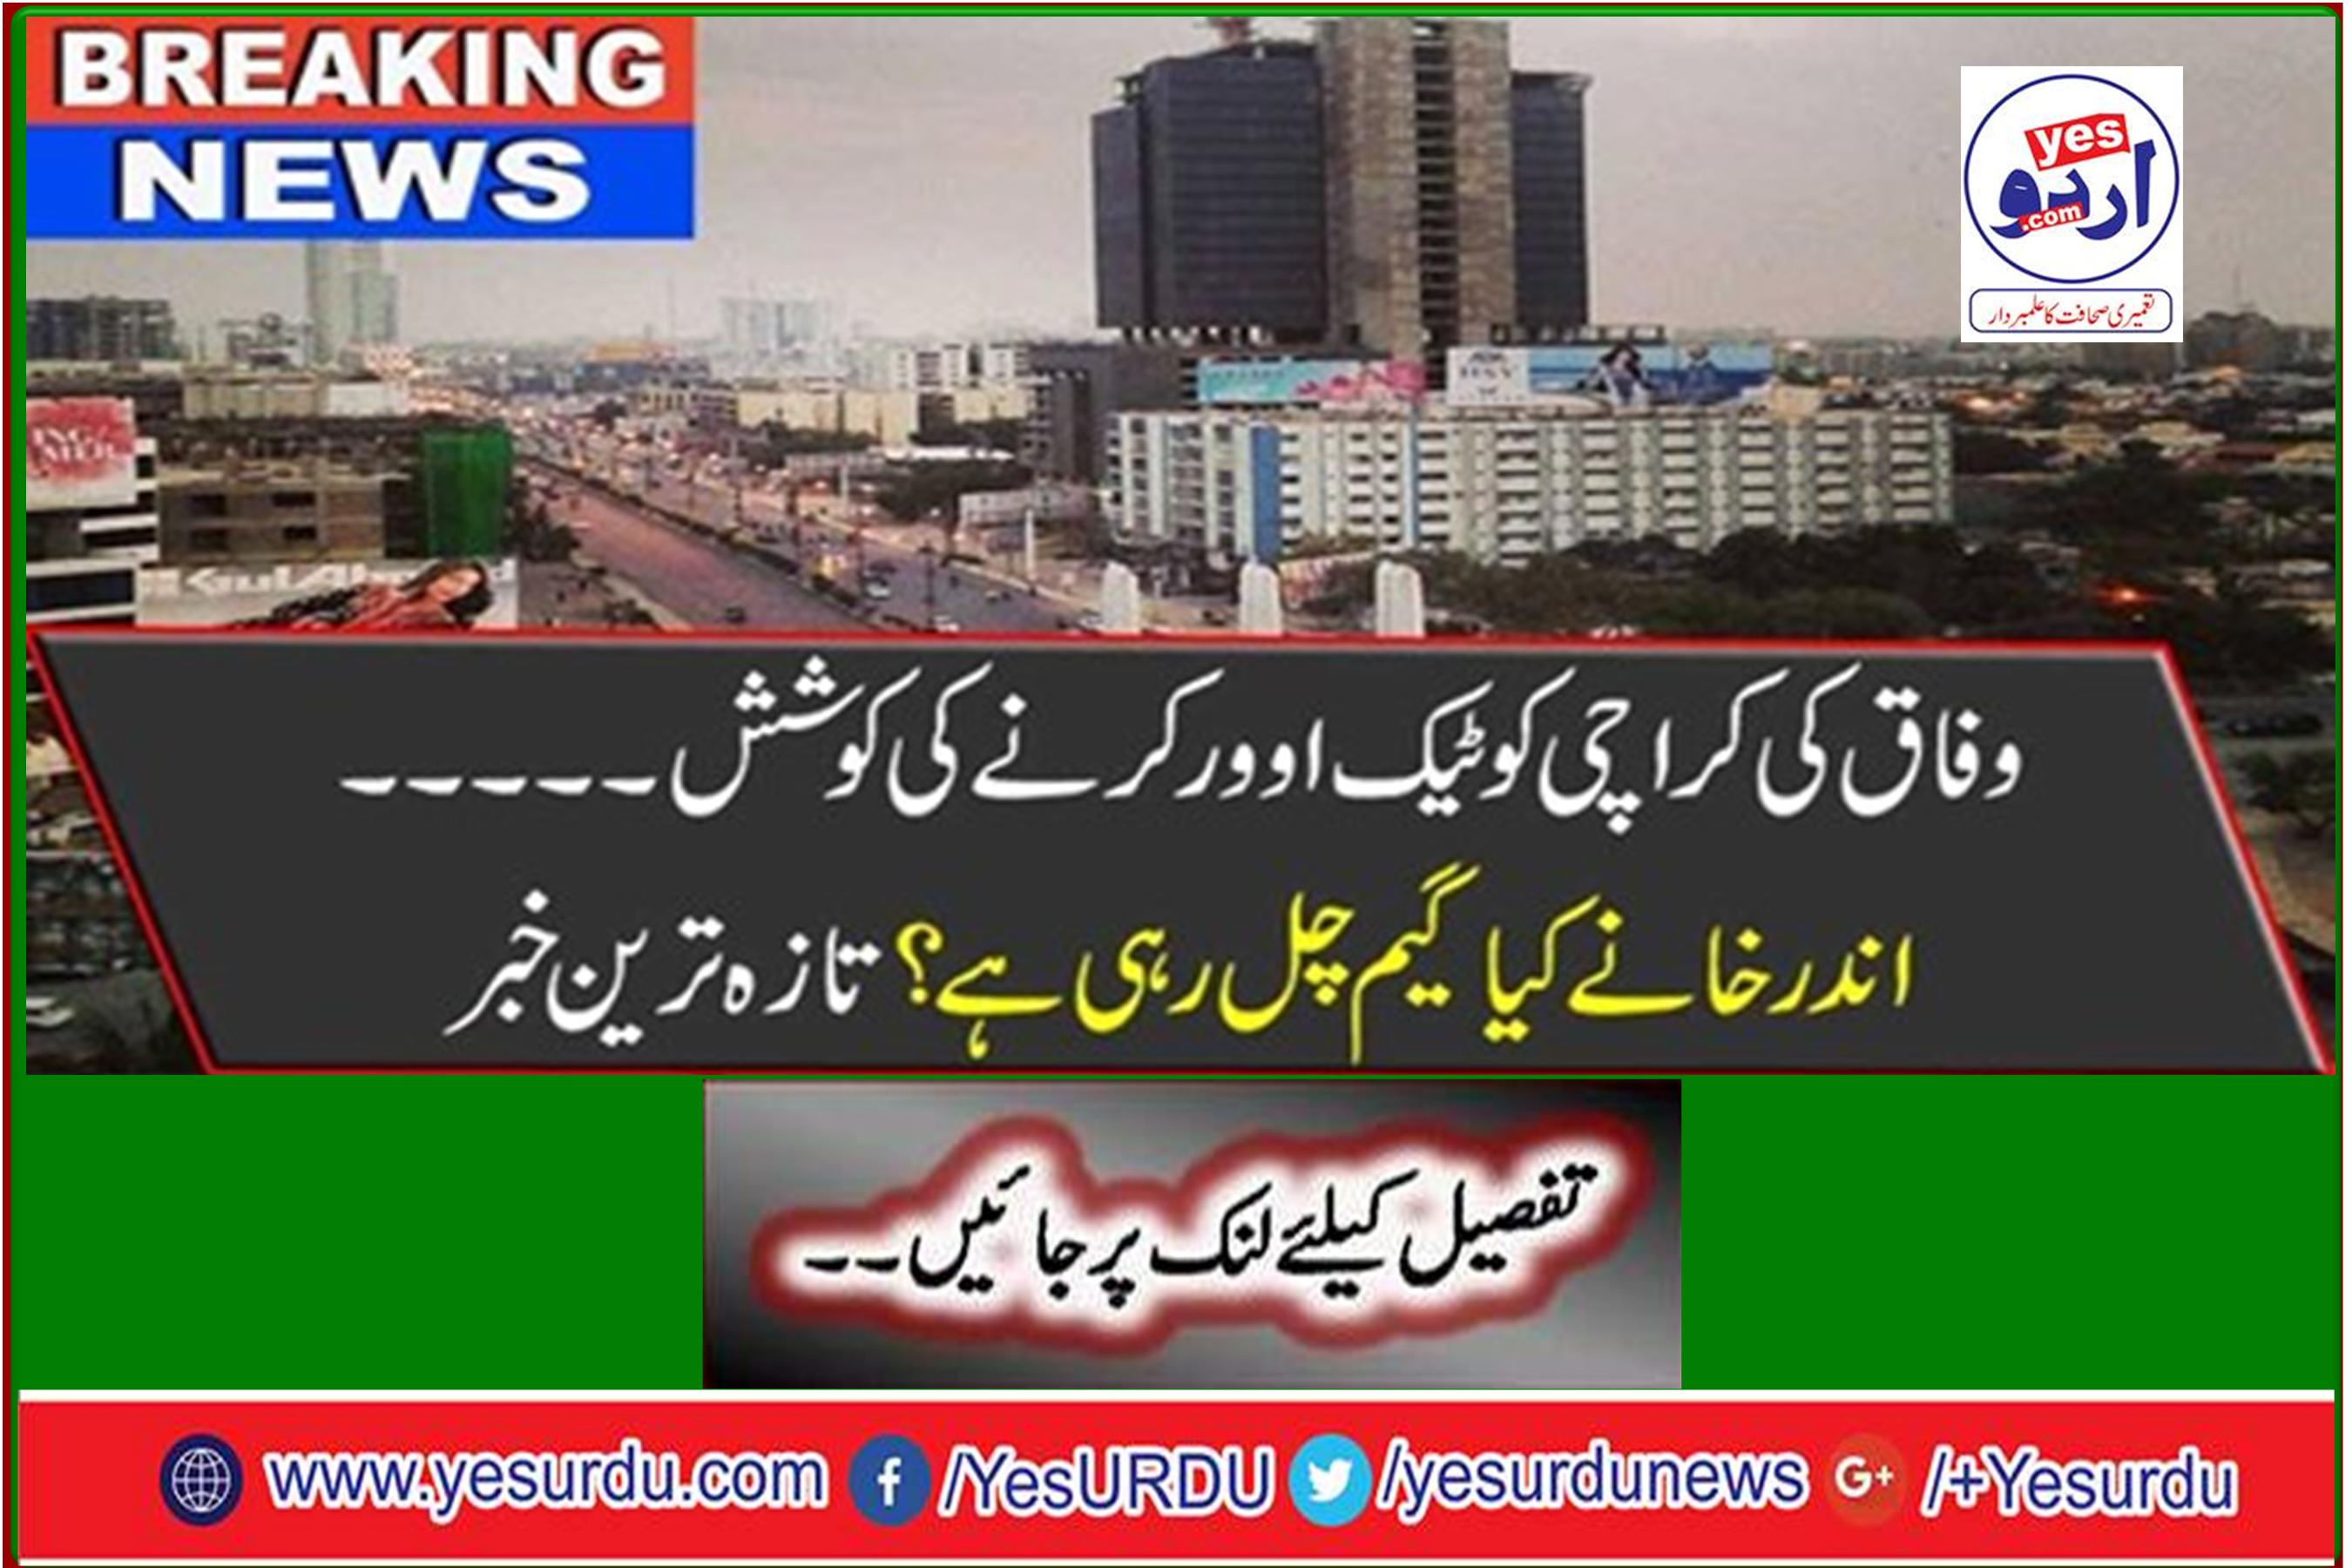 Breaking News: Federal try to take over Karachi: ... What's playing inside the box? Latest news